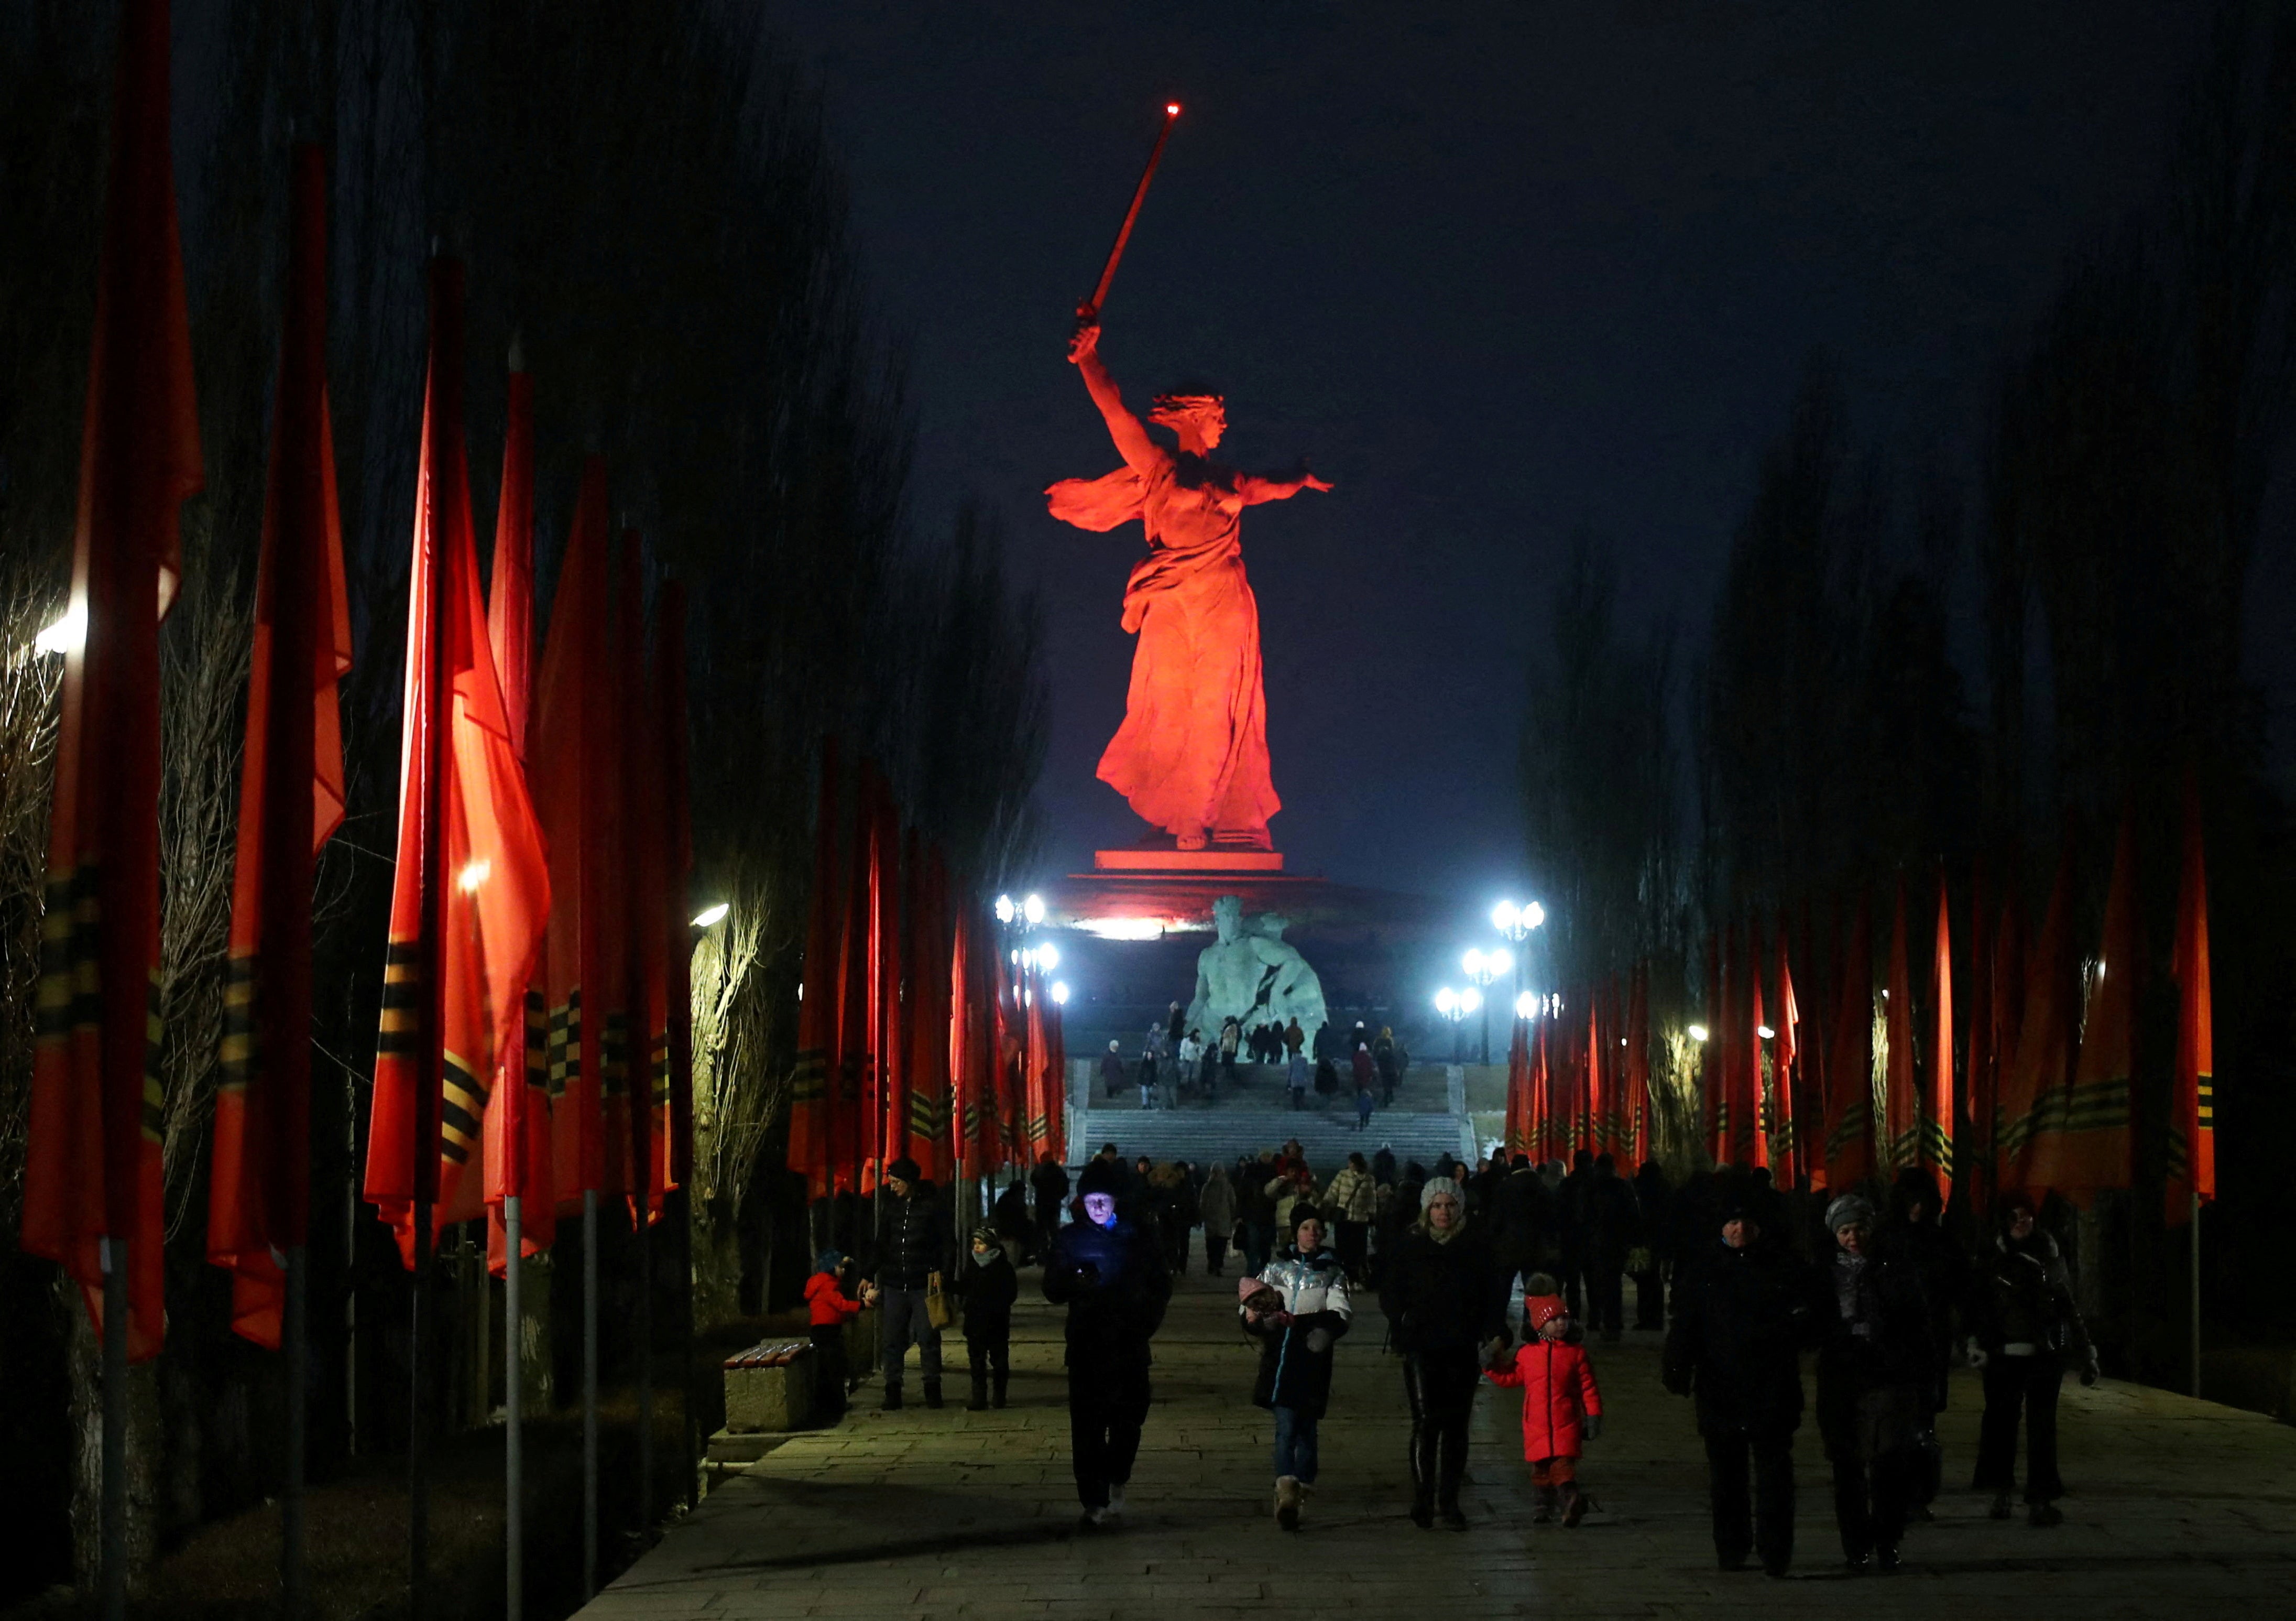 ‘The Motherland Calls’ monument is illuminated in red during a ceremony to mark the 80th anniversary of Soviet victory